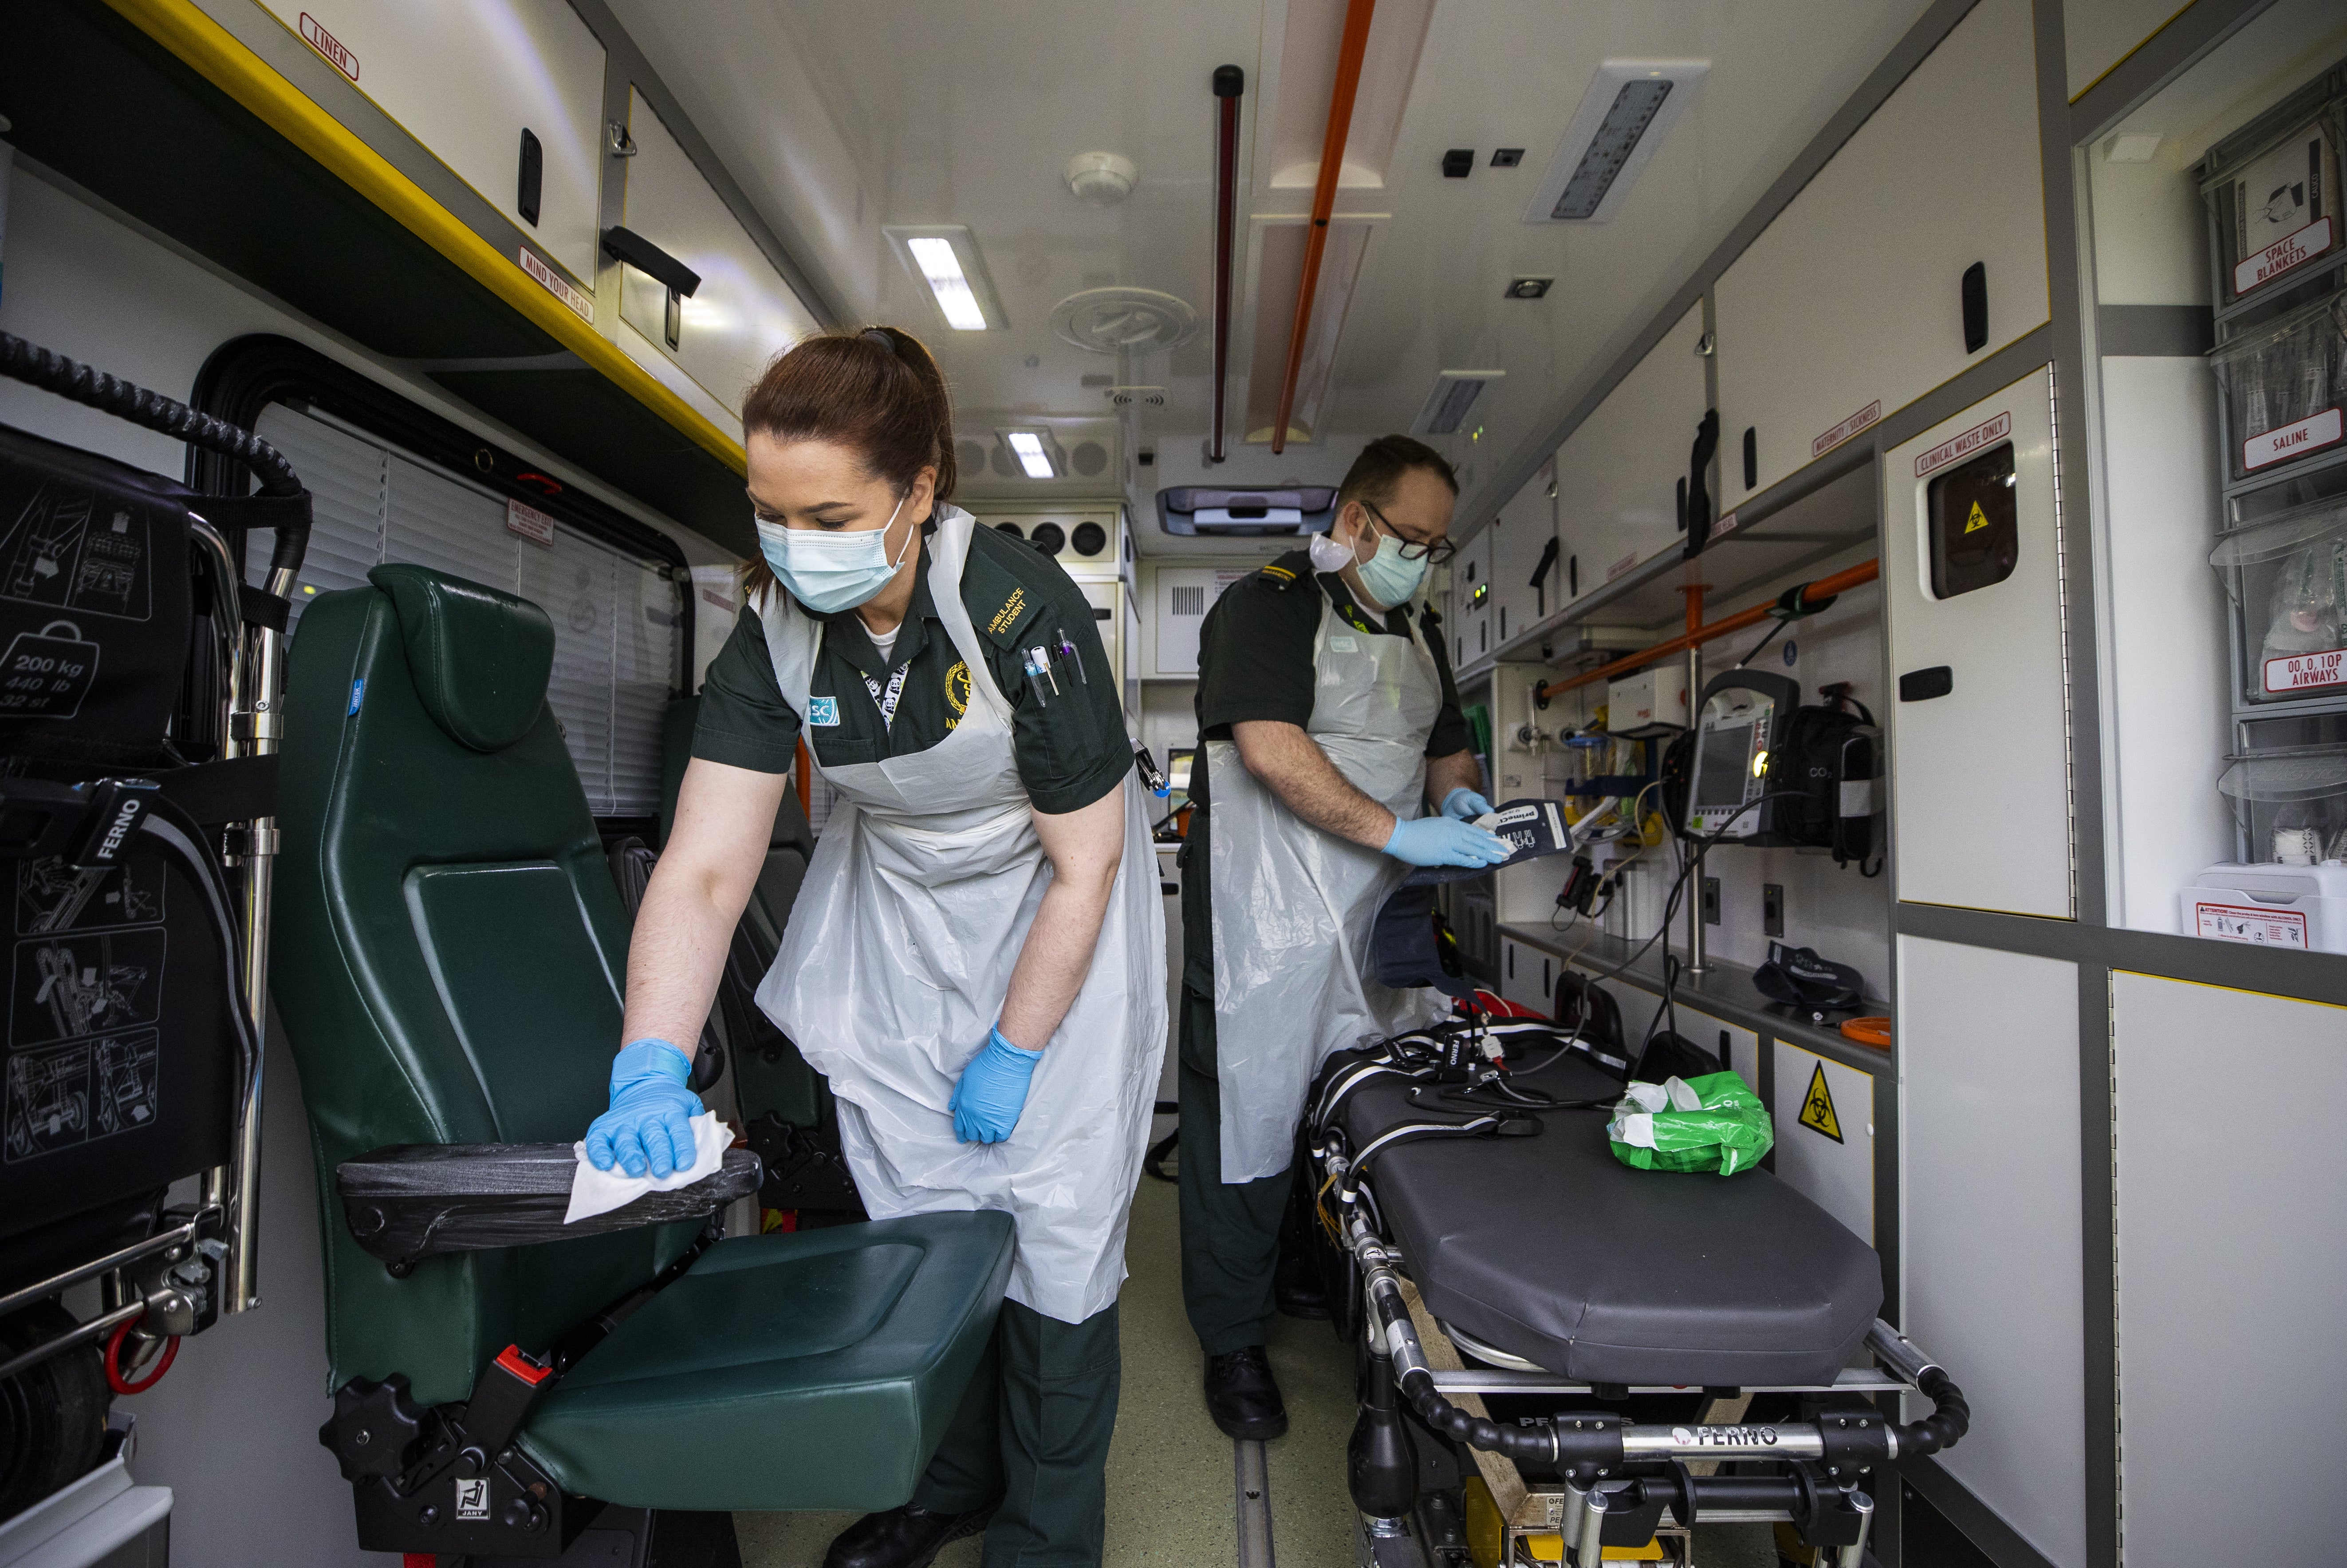 Currently, it can take around 30 to 40 minutes to disinfect an ambulance